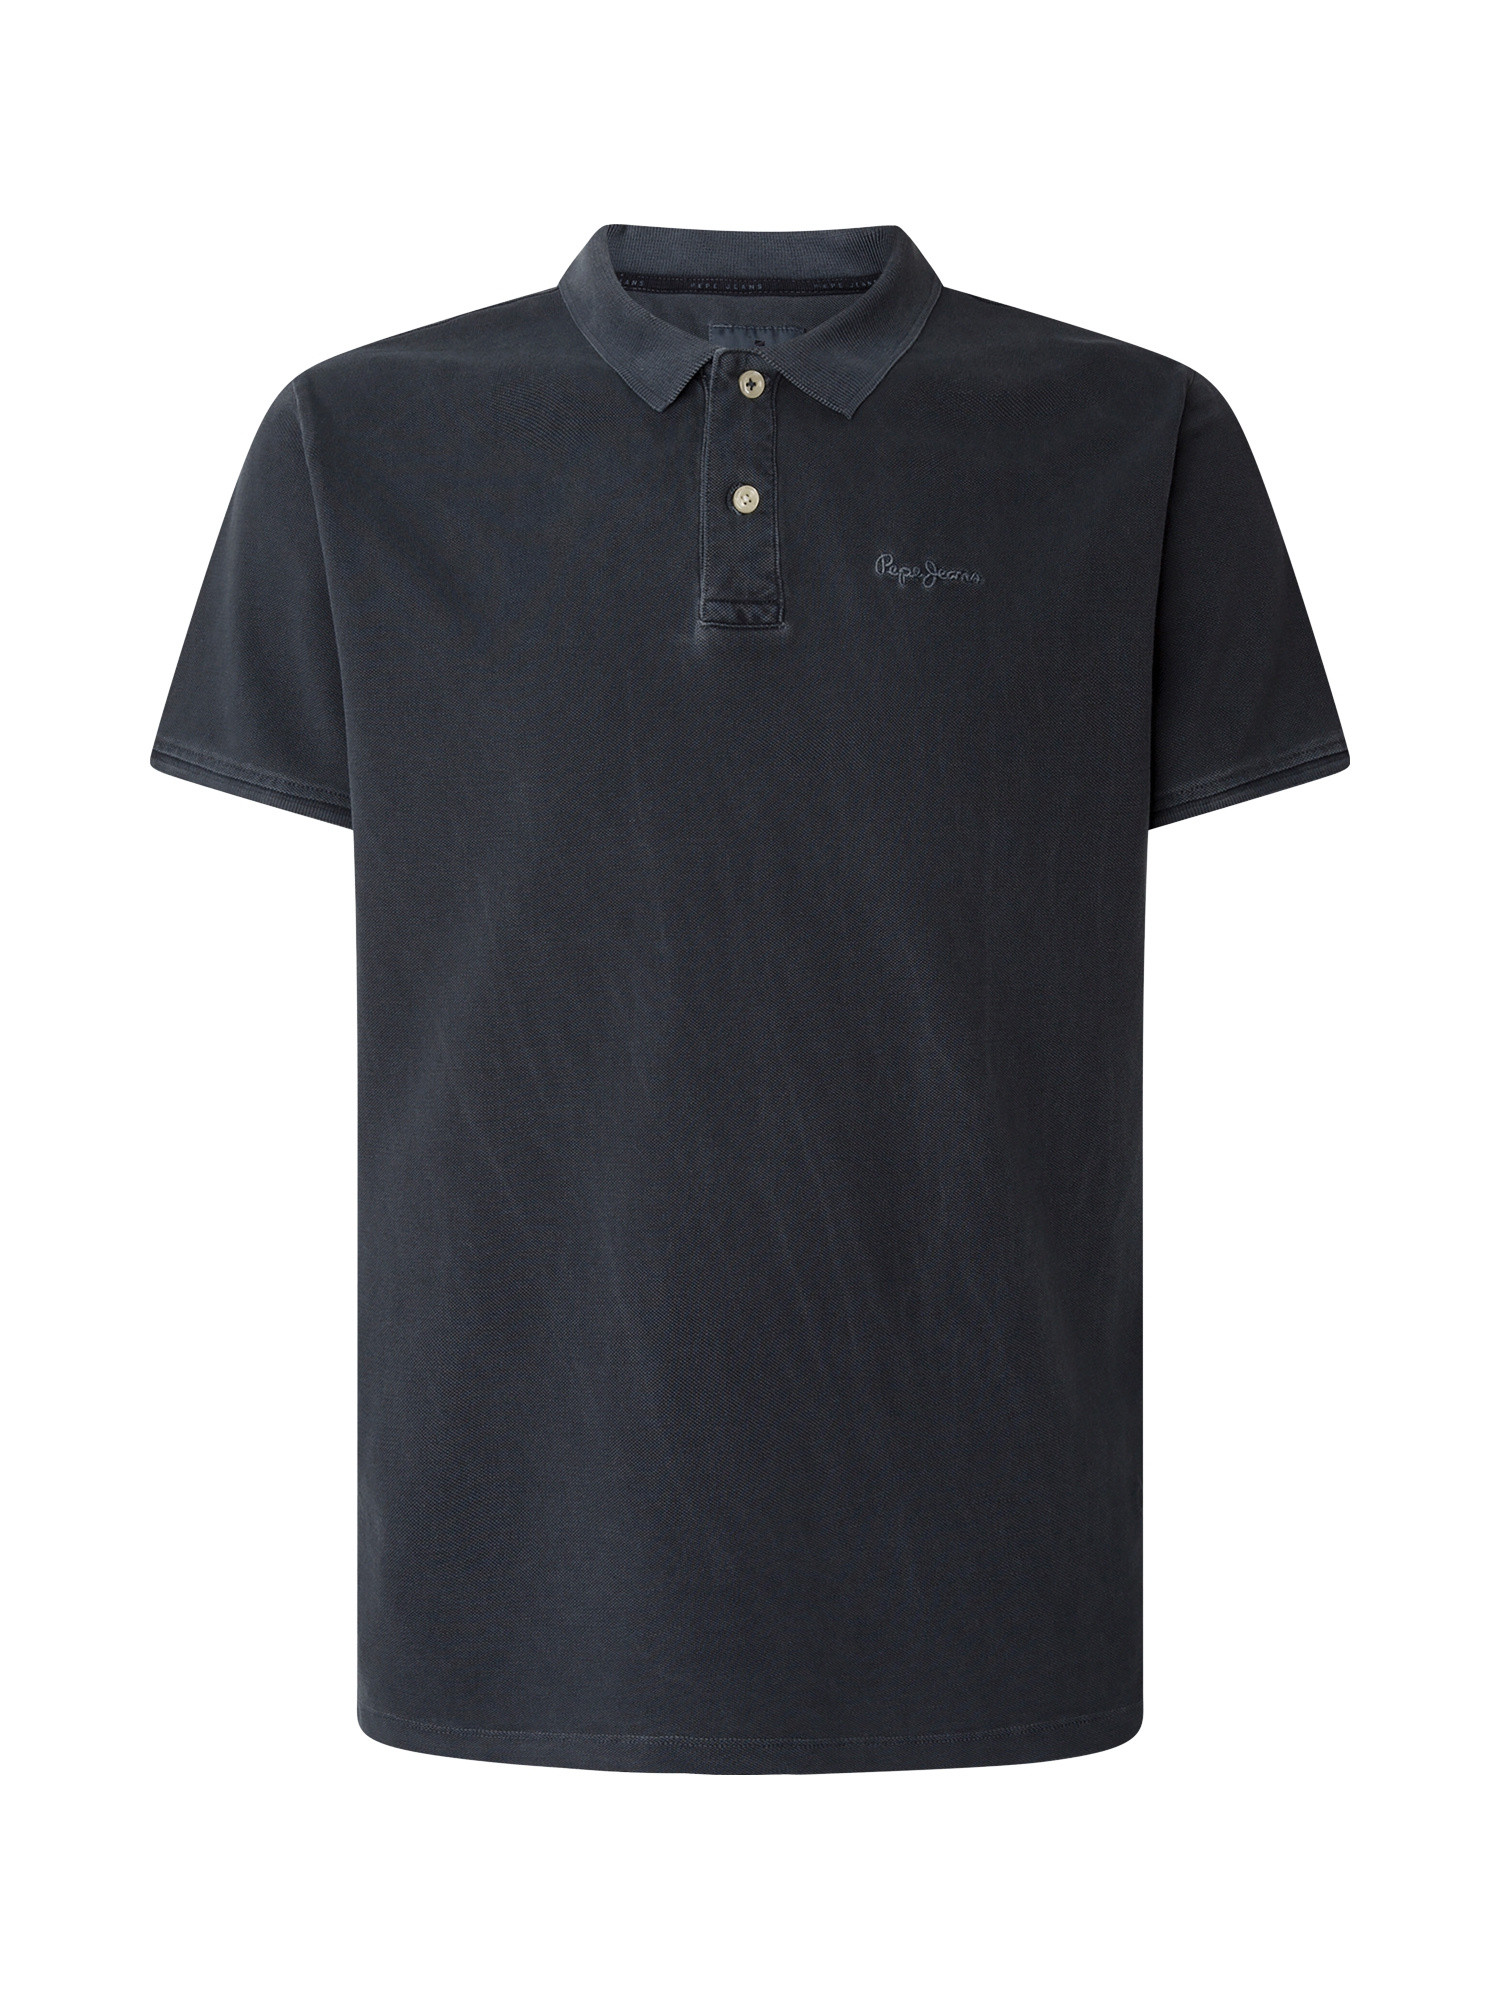 Pepe Jeans - Cotton polo shirt with logo, Dark Blue, large image number 0